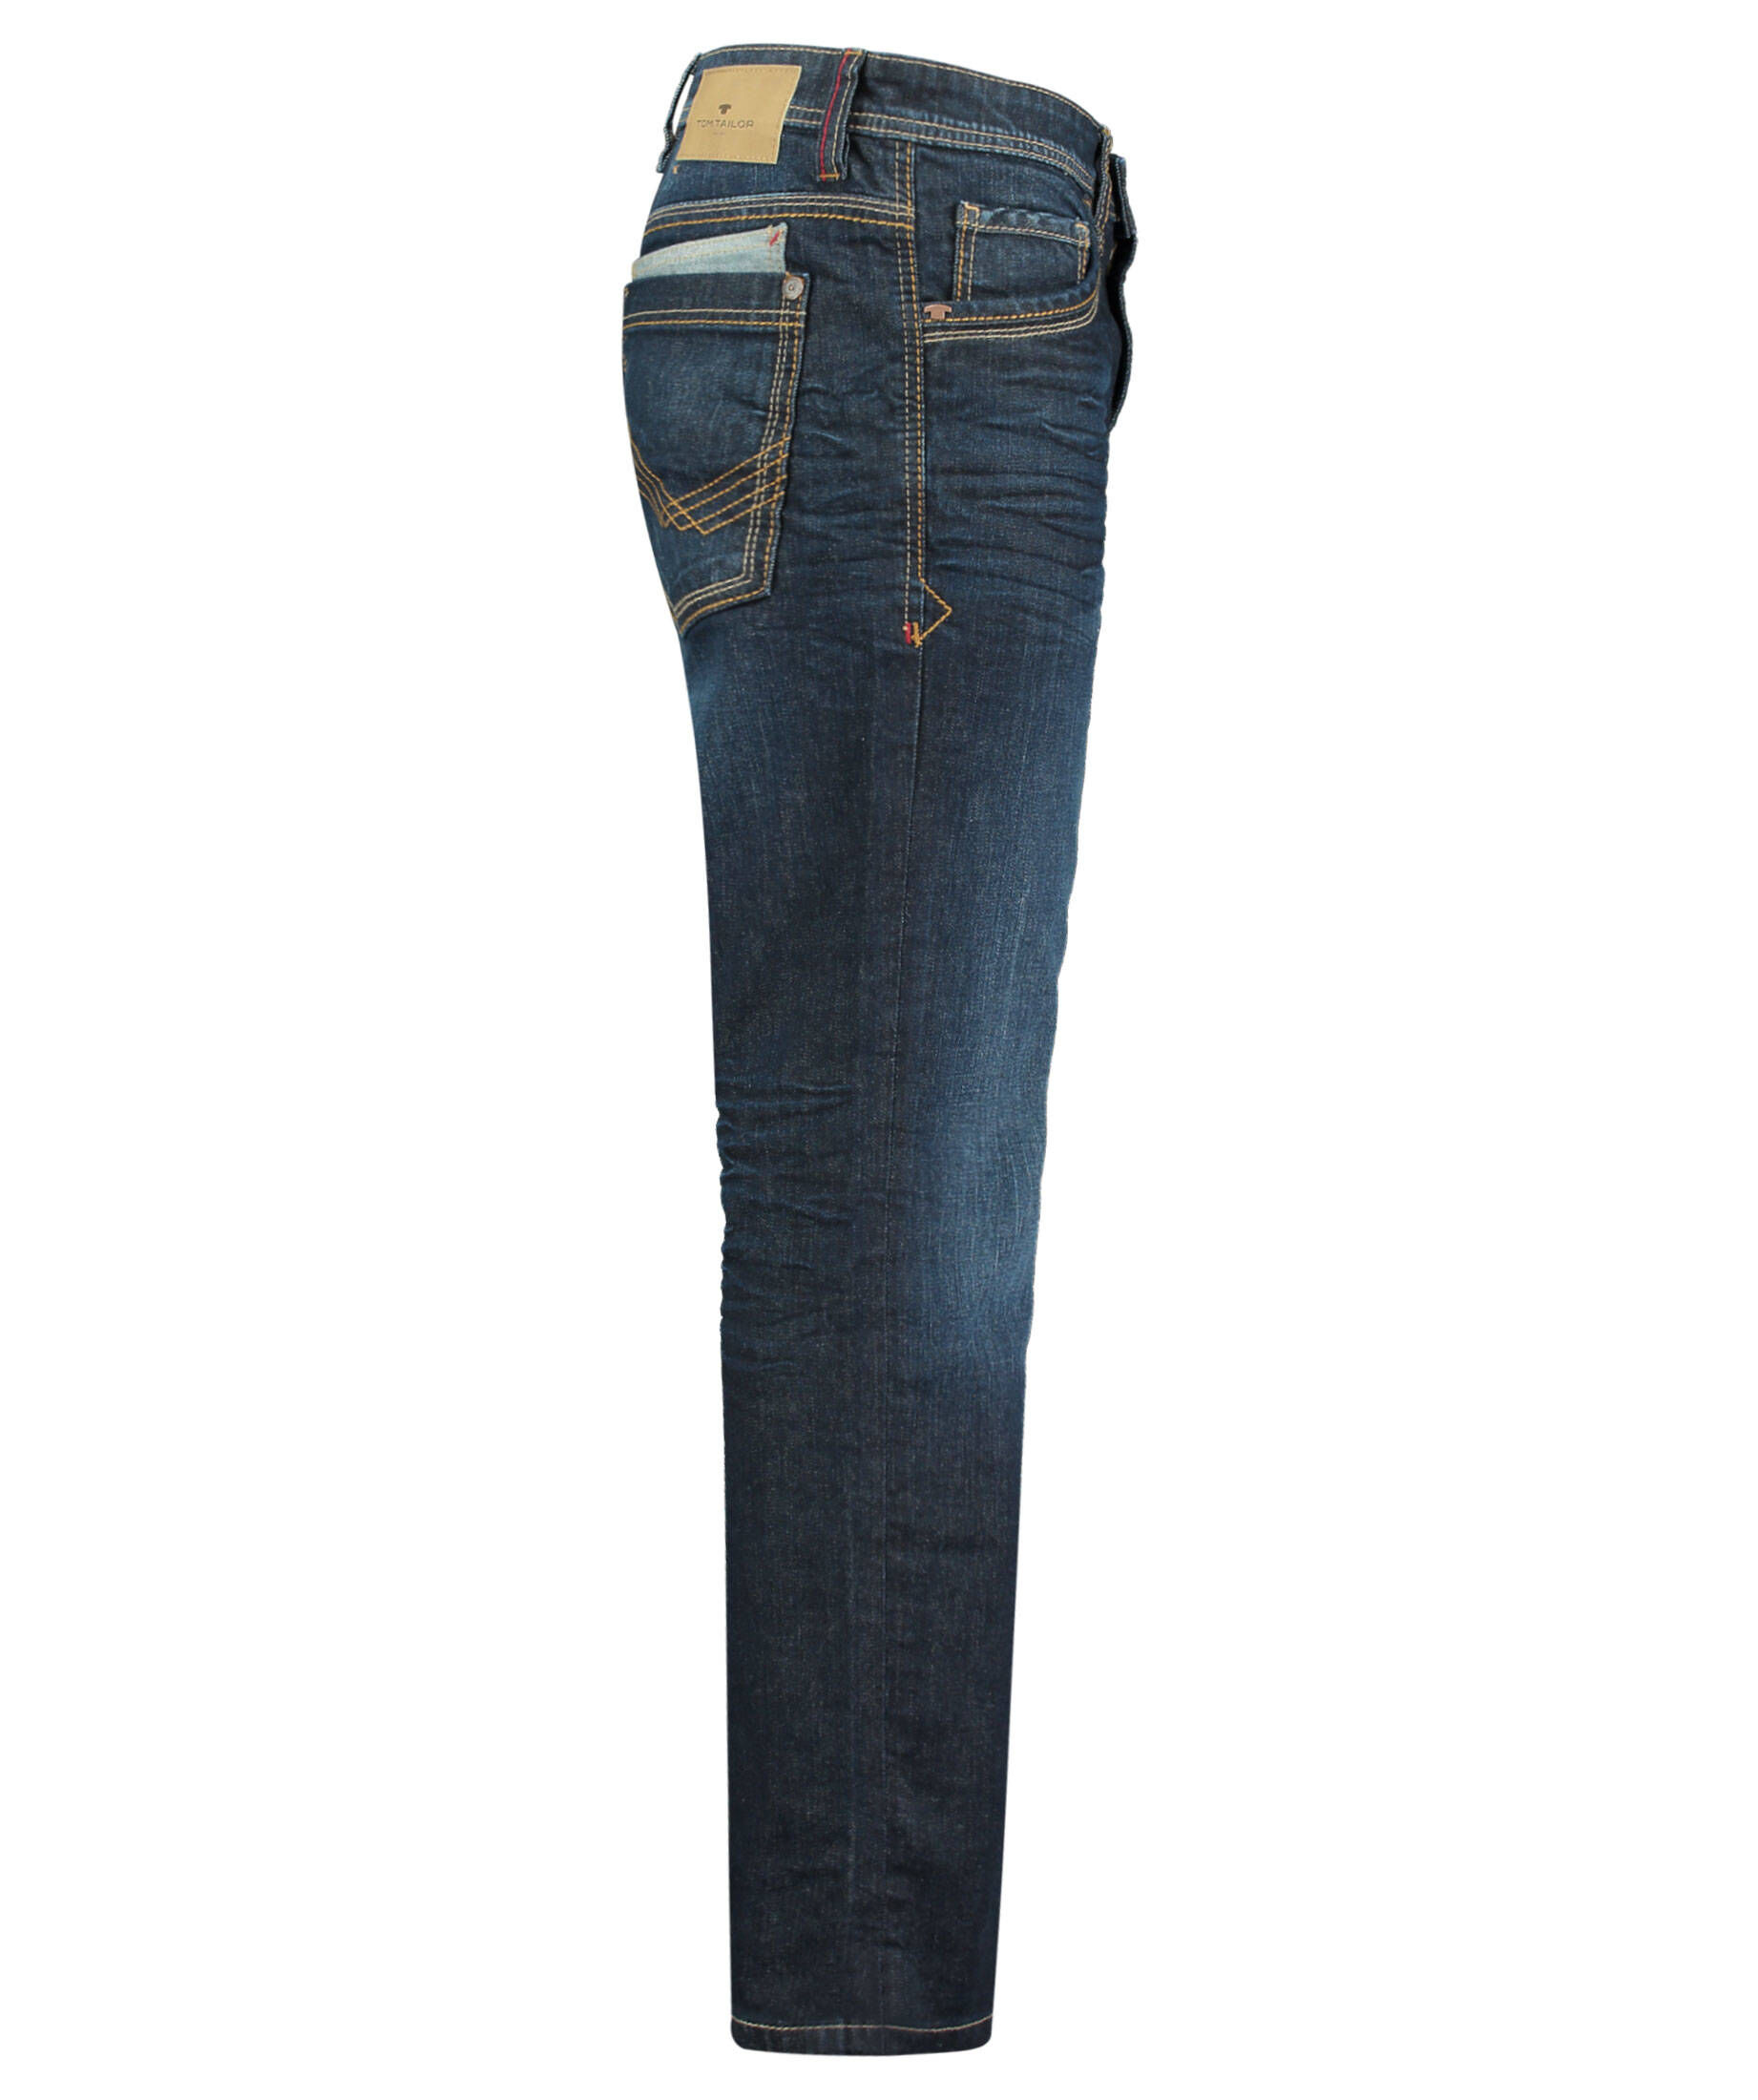 Circus catch Characterize Herren Jeans "Marvin" Straight Fit